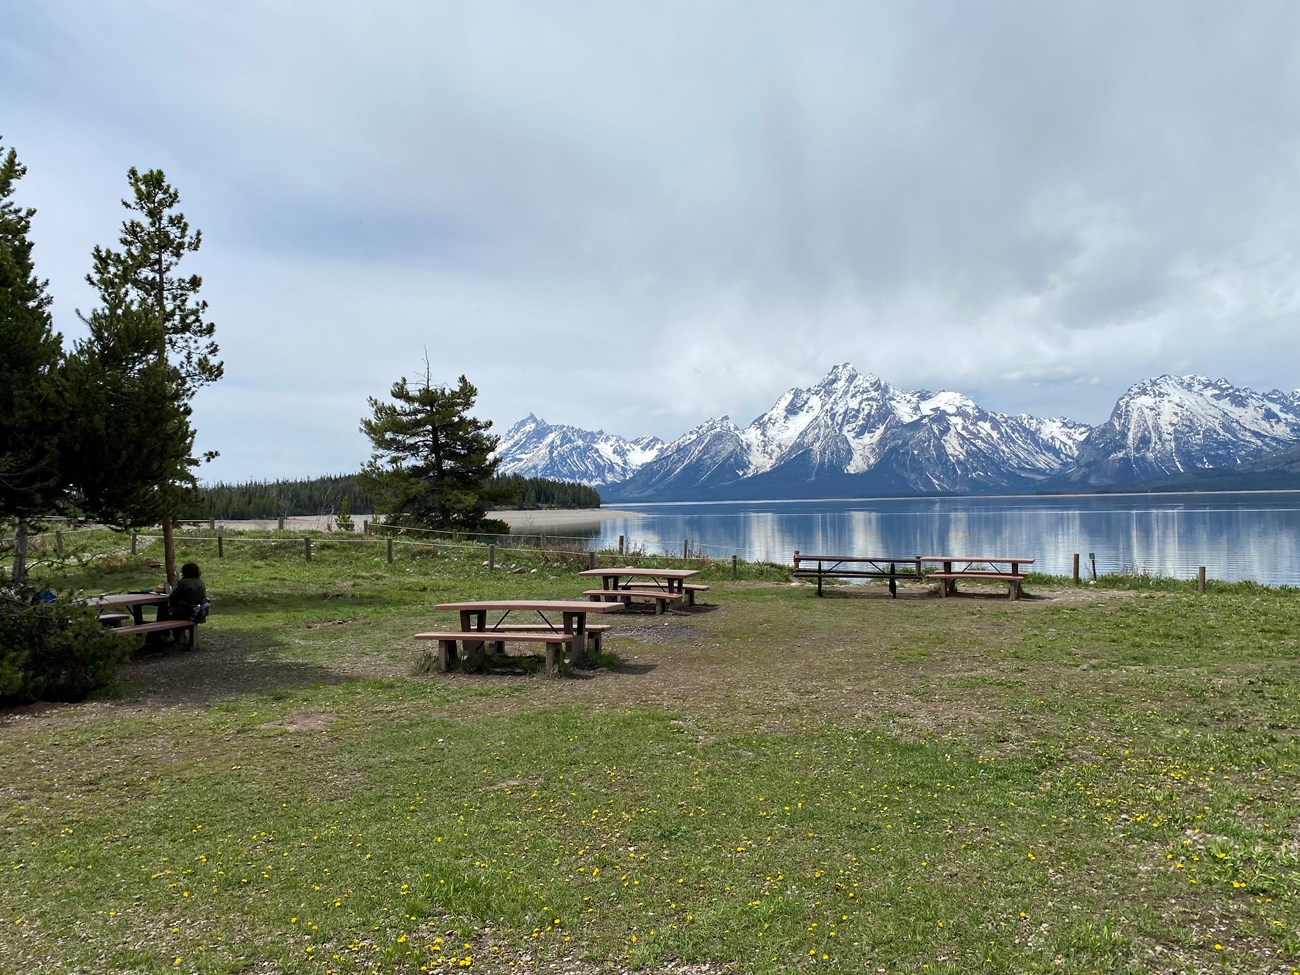 Picnic tables set in front of a view of Mount Moran across Jackson Lake